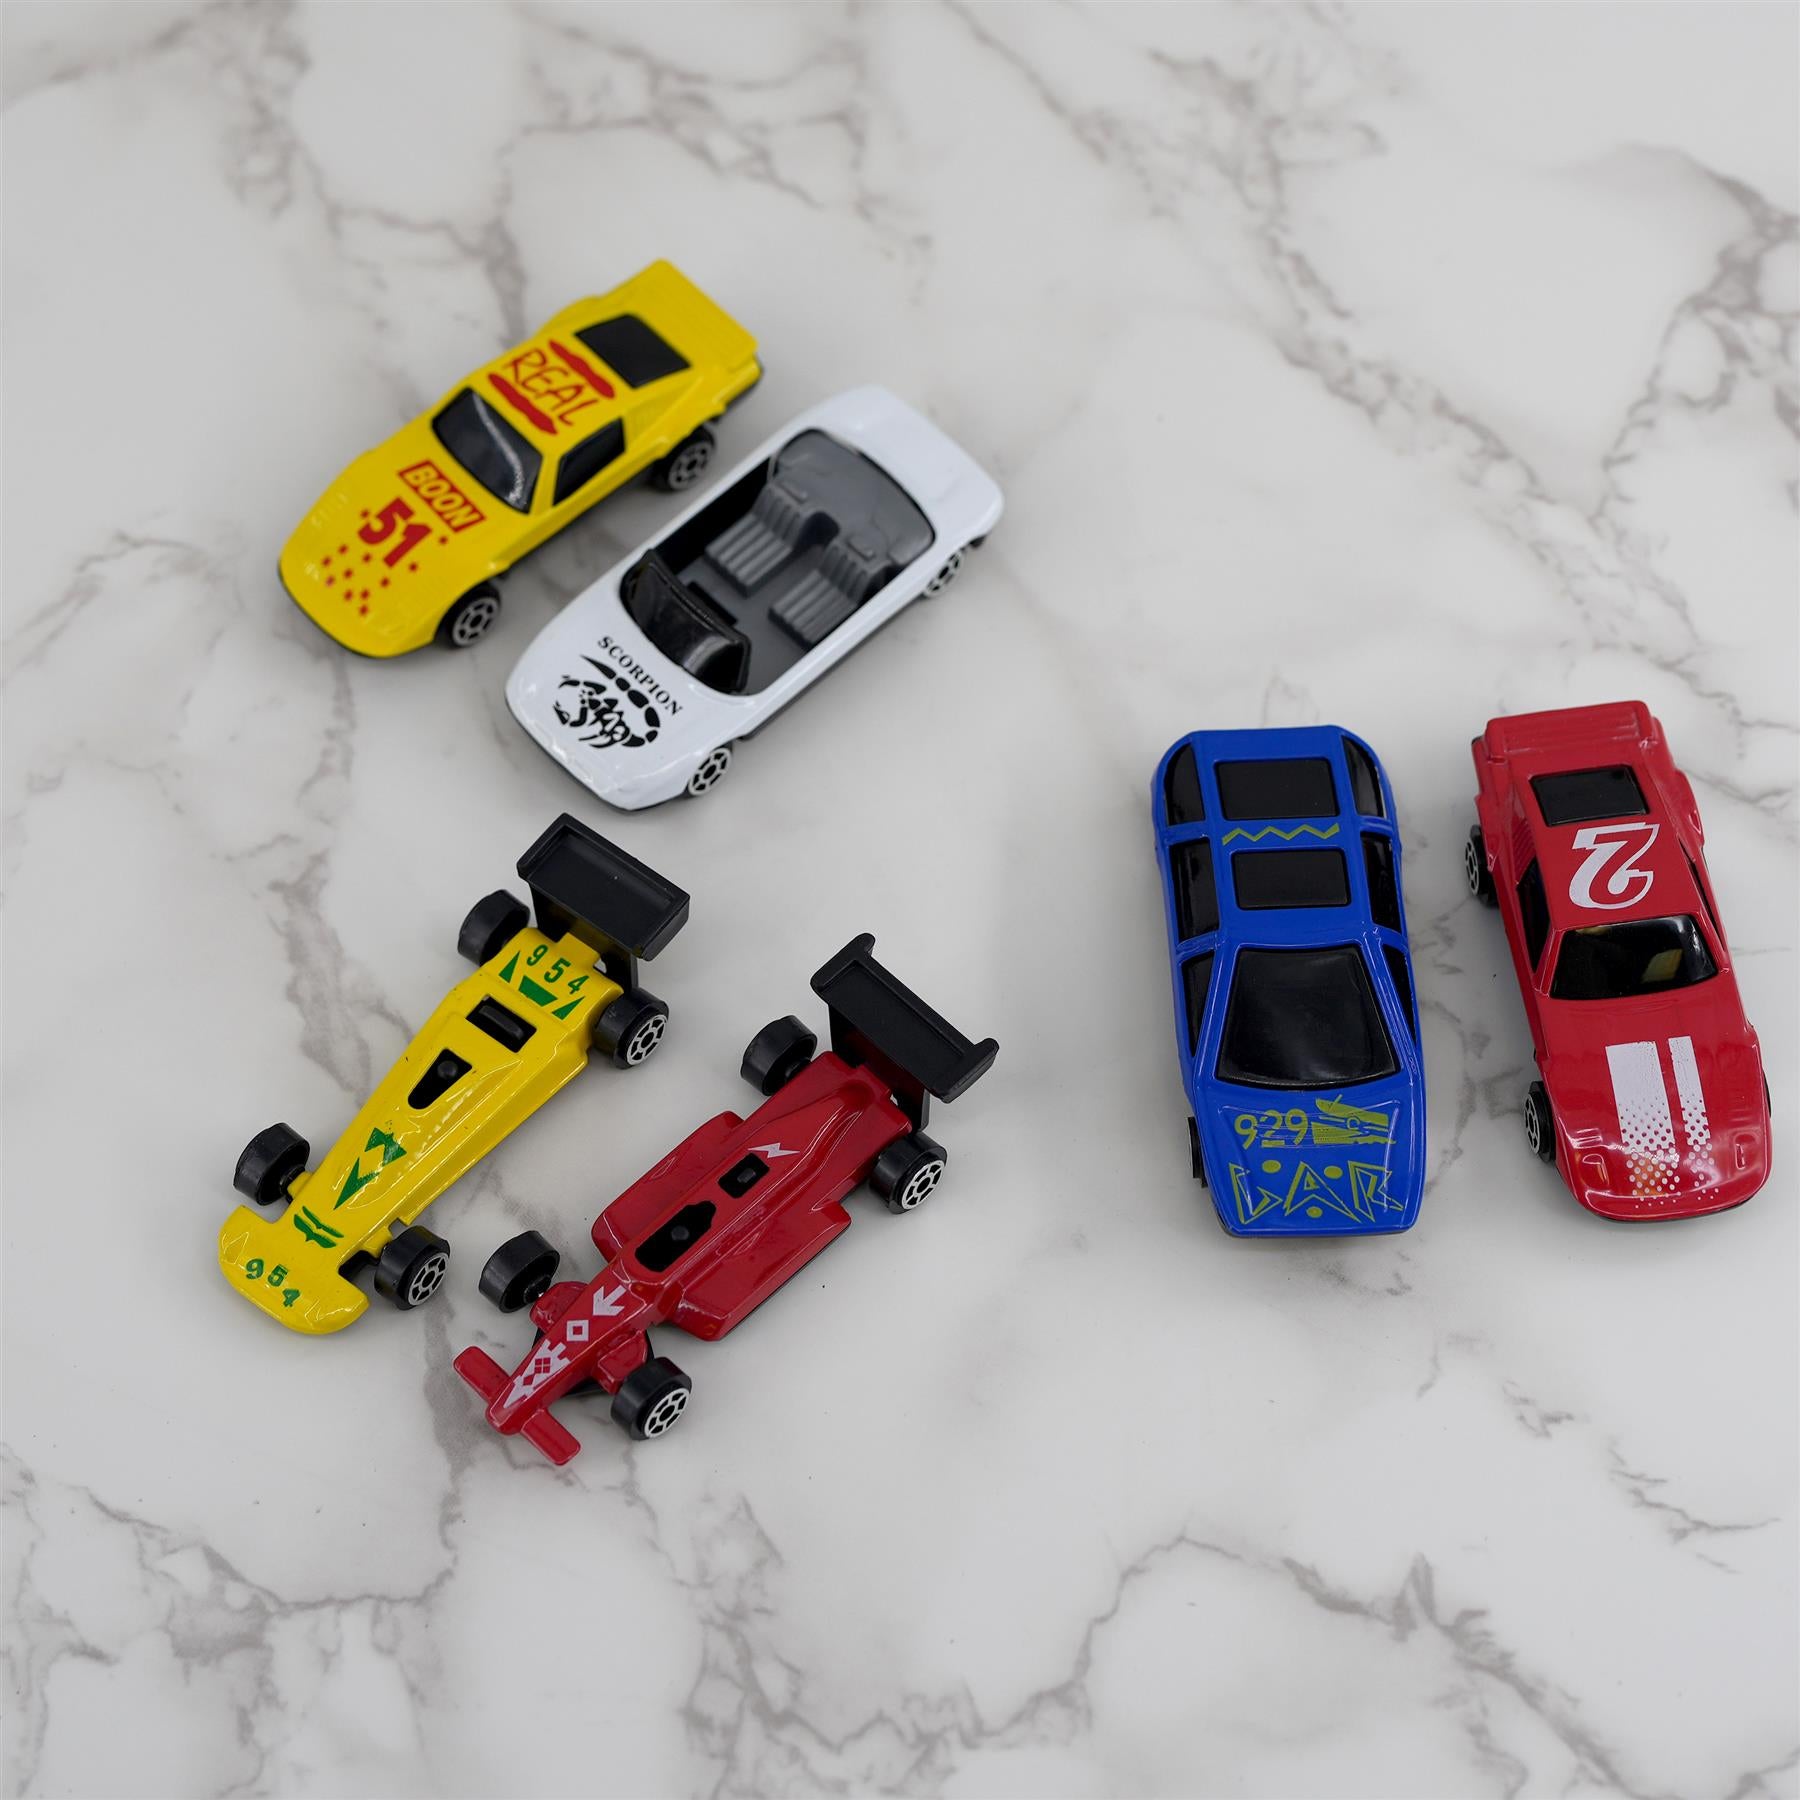 36 Pieces Die Cast Car Set by The Magic Toy Shop - UKBuyZone